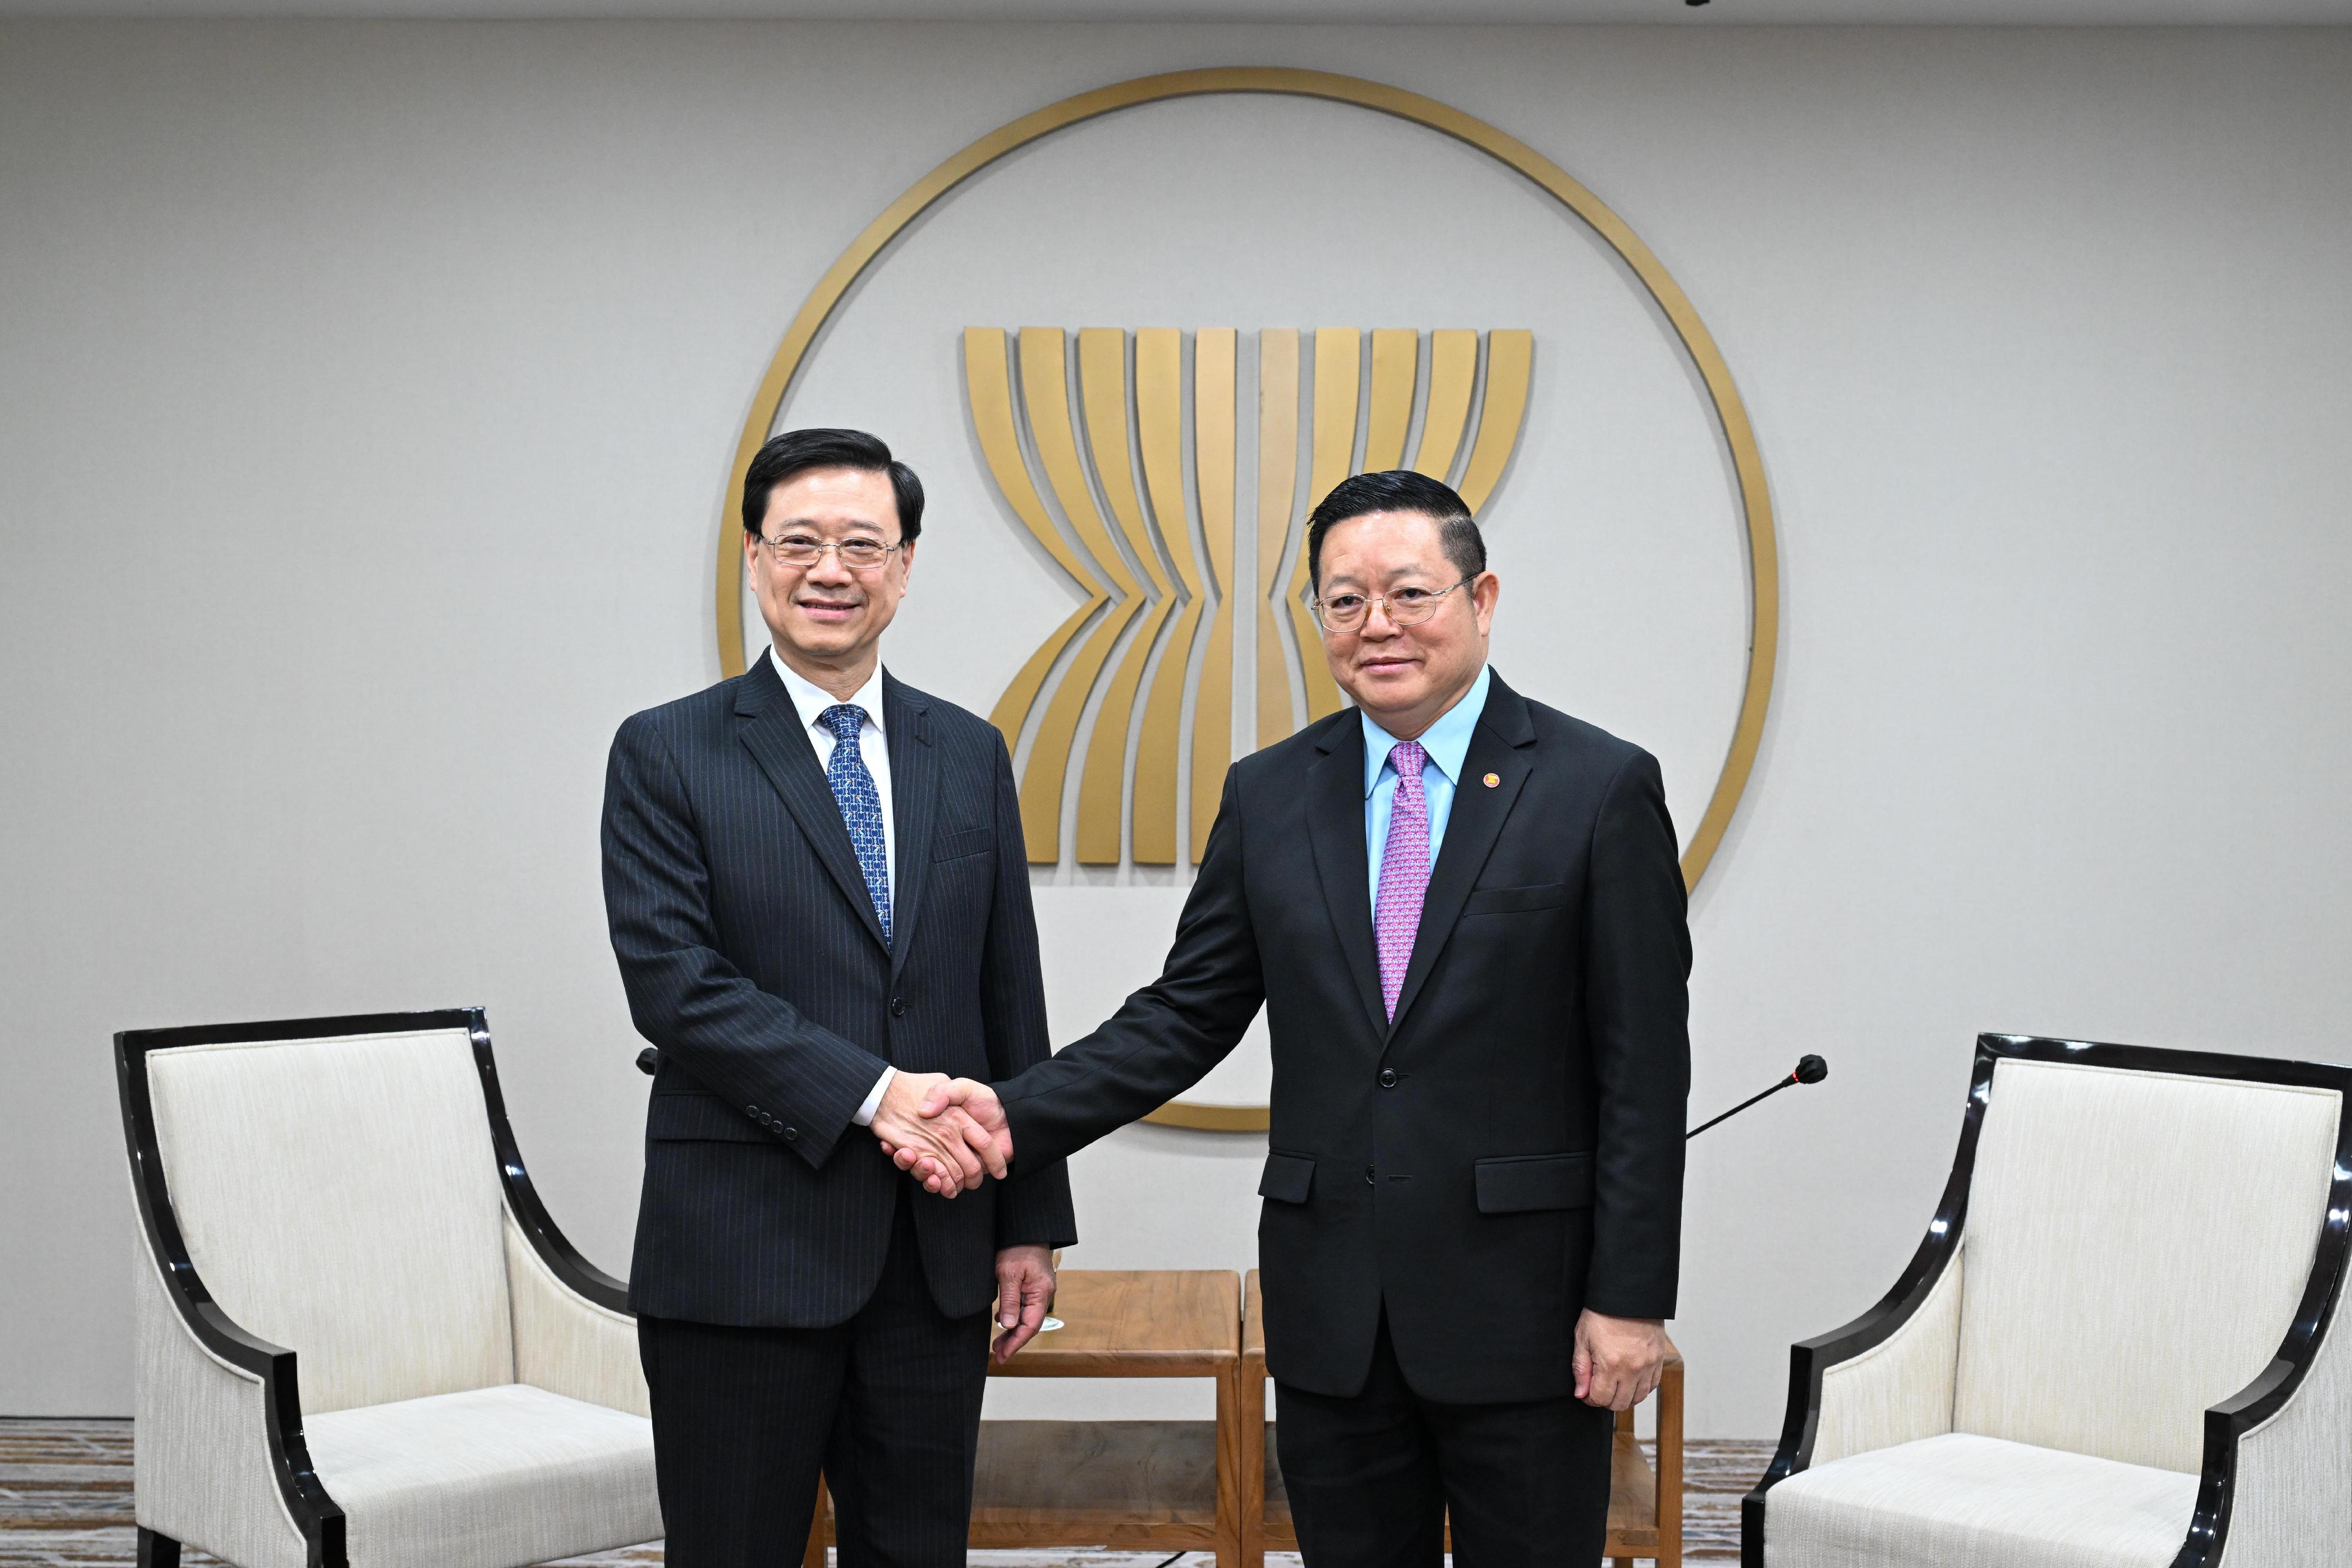 The Chief Executive, Mr John Lee (left), meets with the Secretary-General of the Association of Southeast Asian Nations, Dr Kao Kim Hourn (right), in Jakarta, Indonesia, today (July 25).